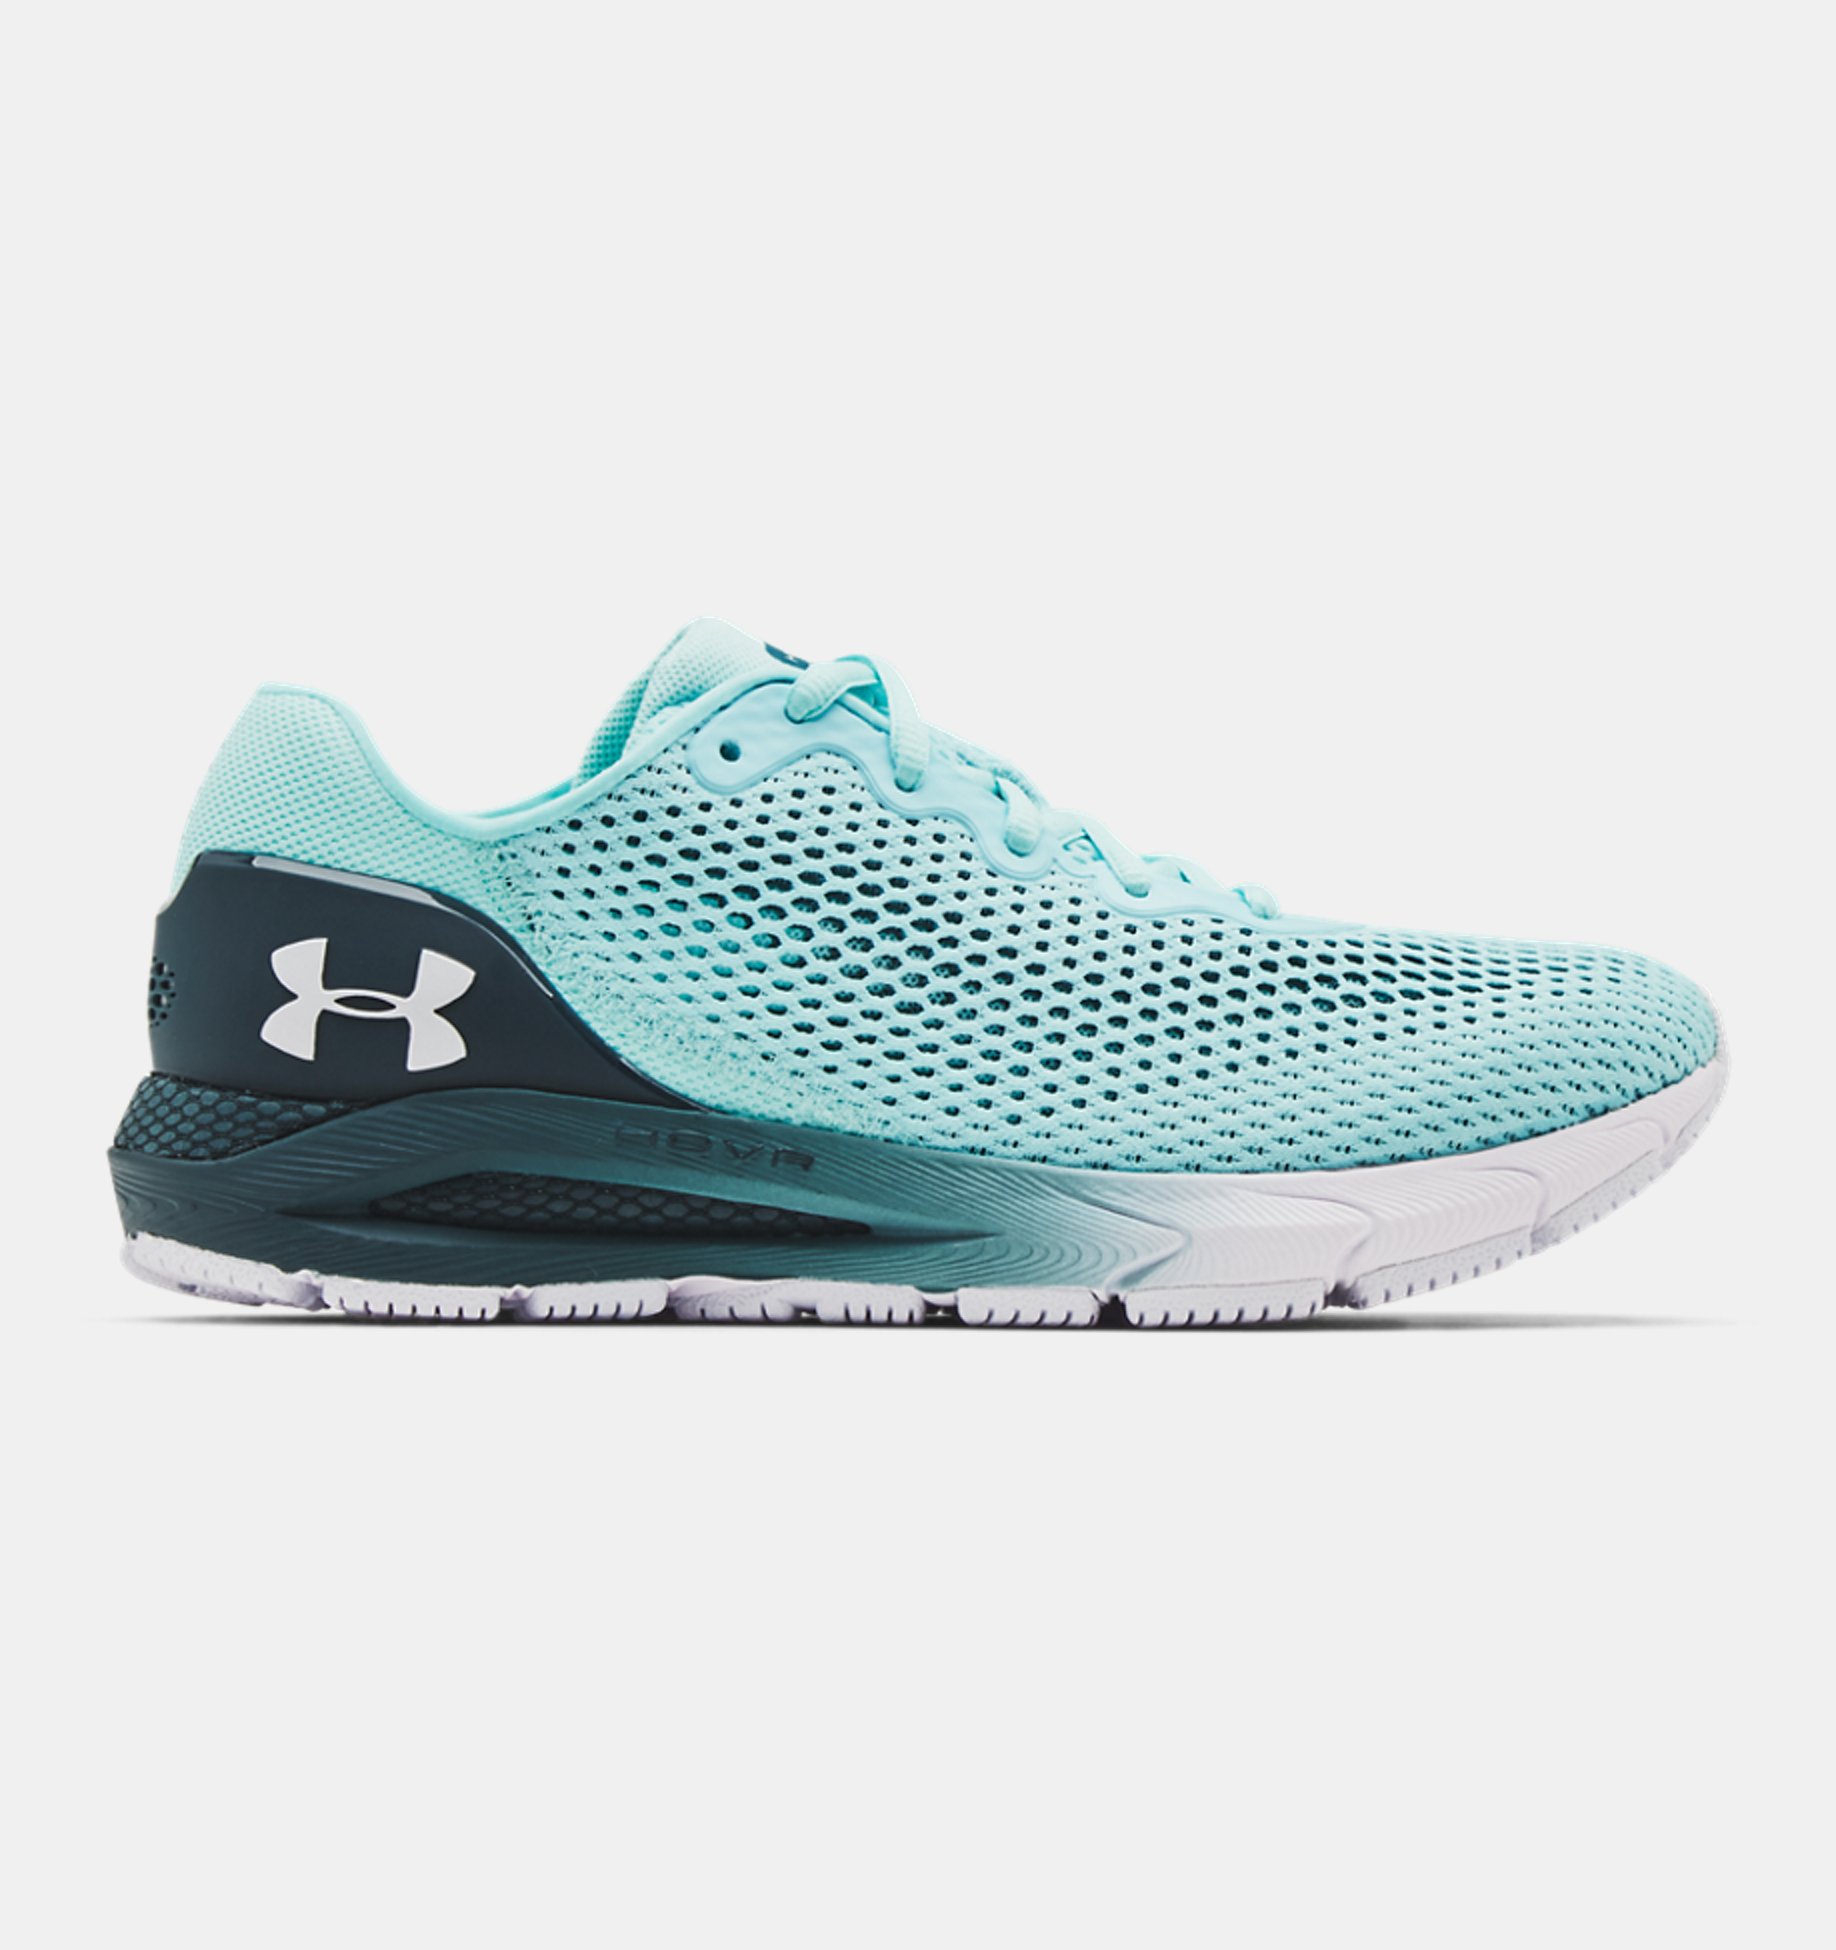 Under Armour Mens HOVR Sonic NC Running Shoes Trainers Sneakers White Sports 